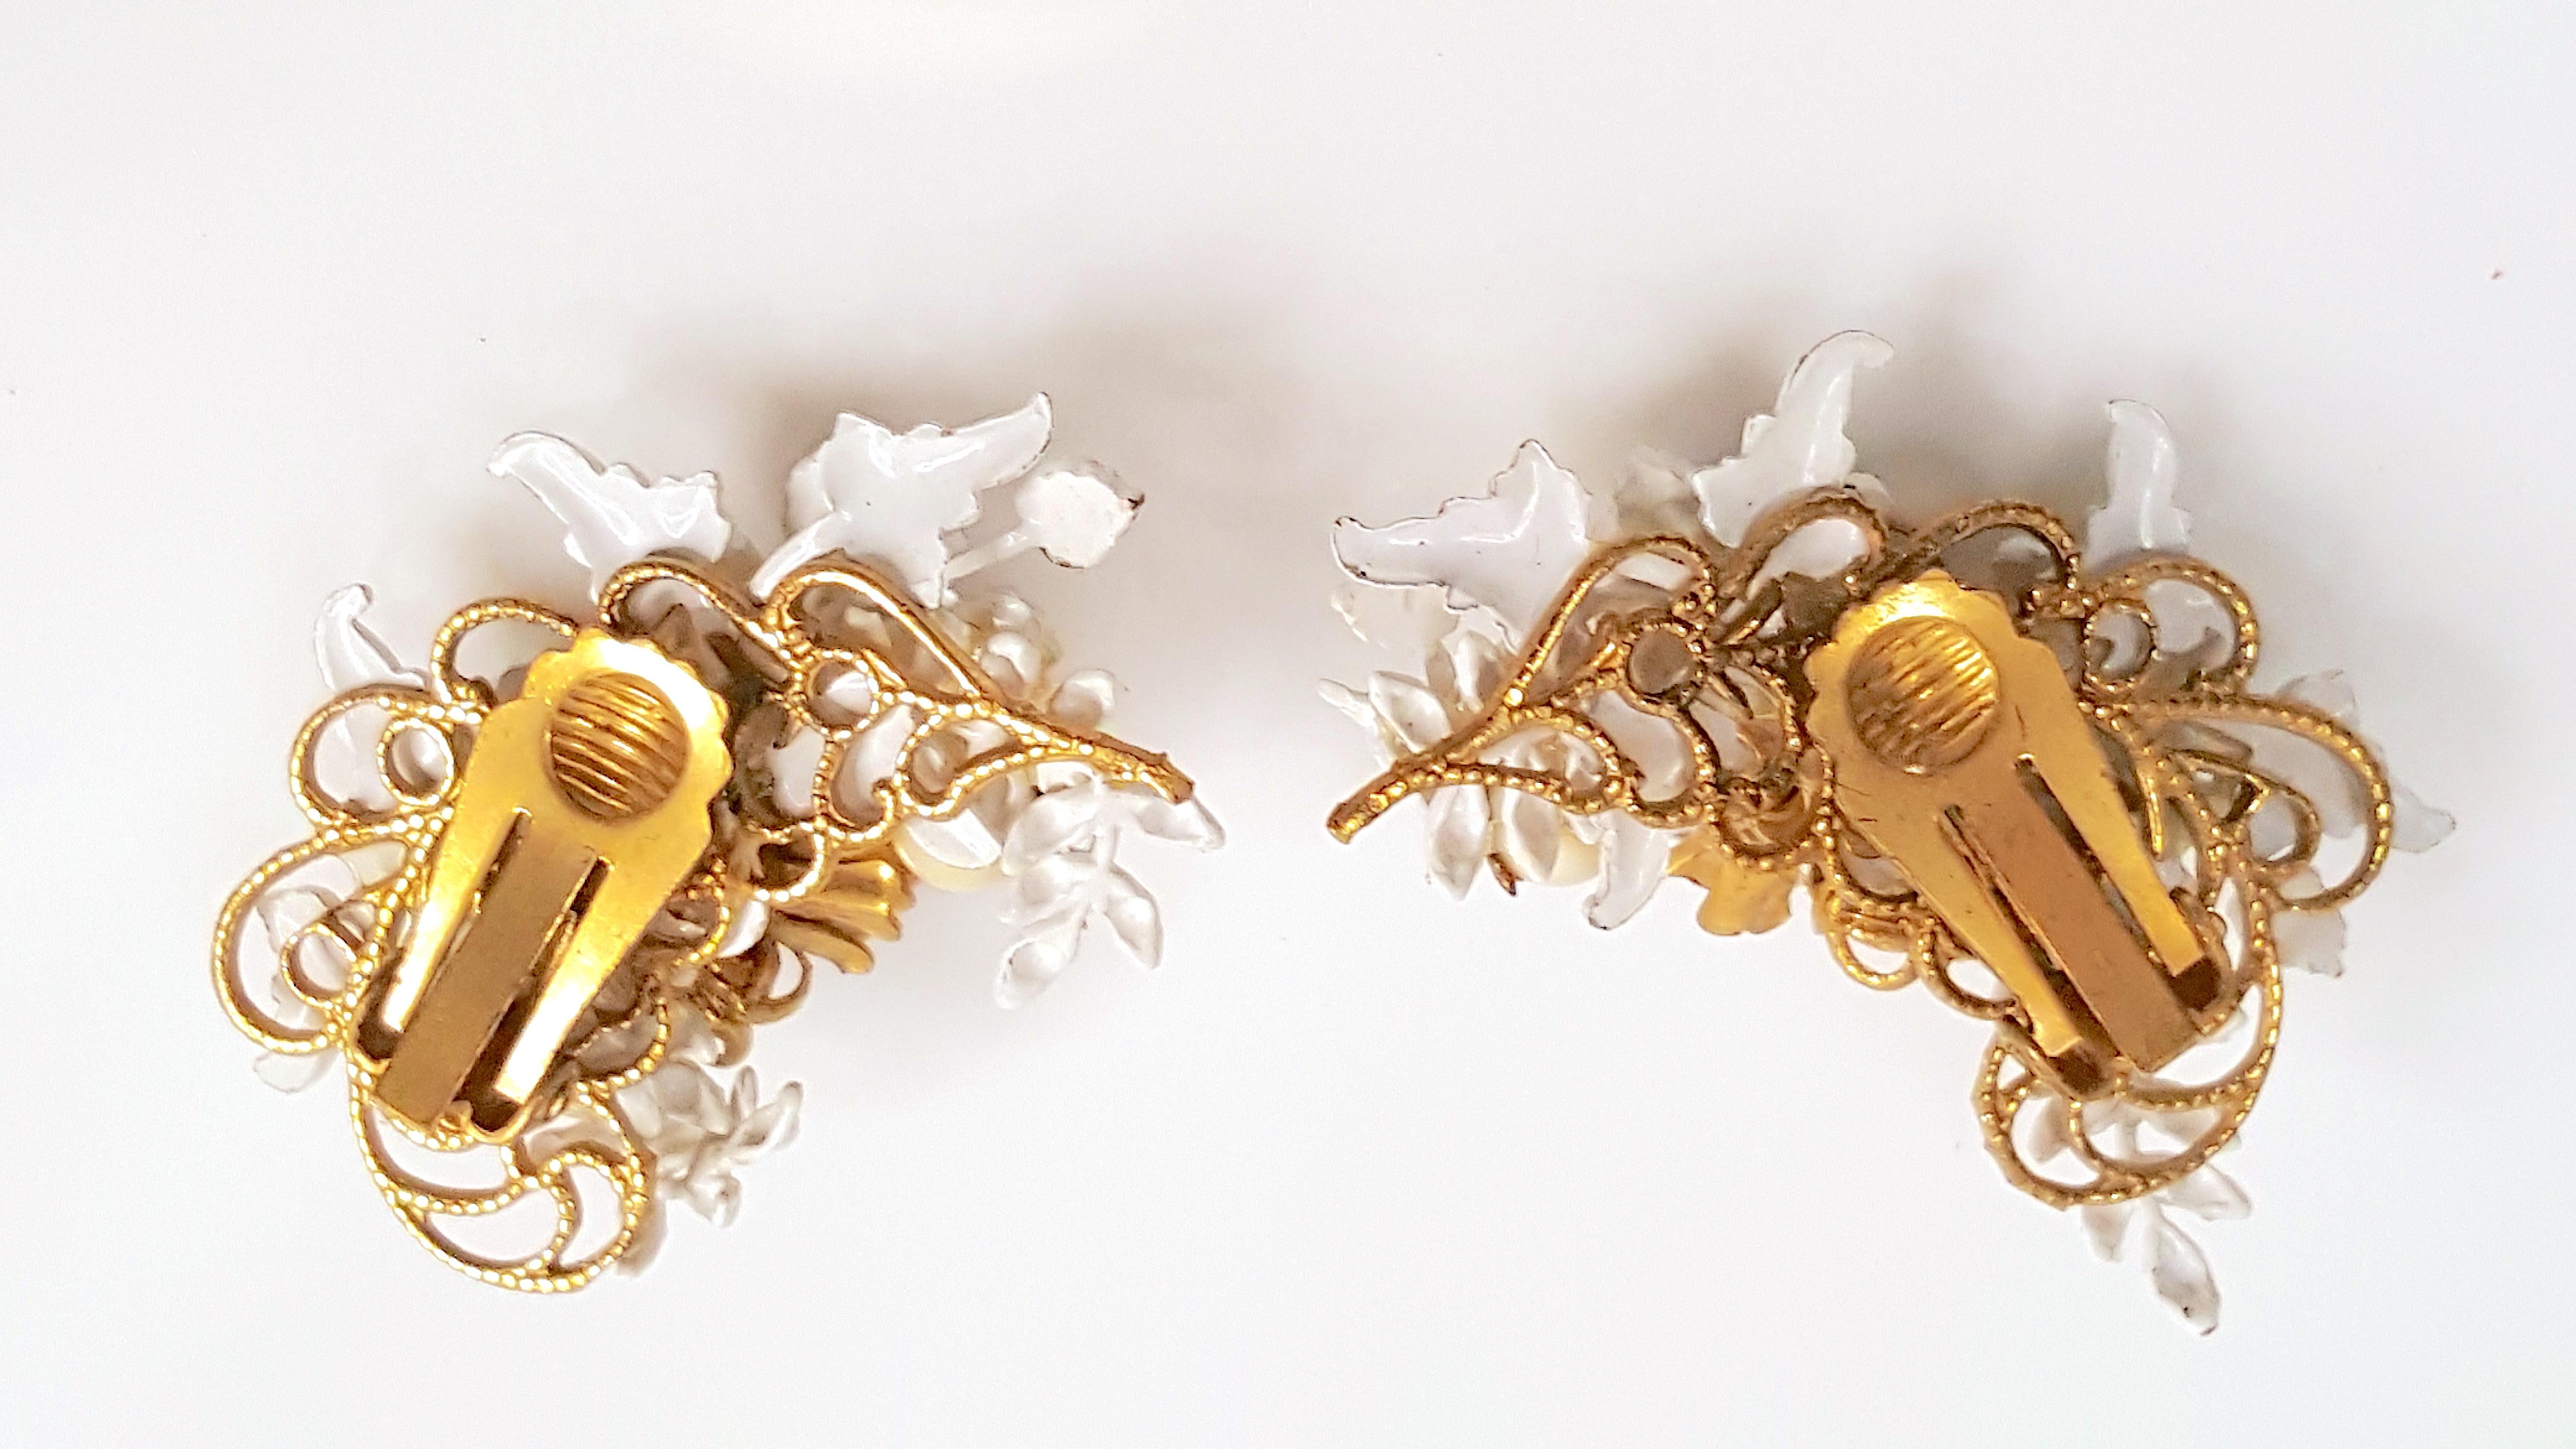 Before the brand signature was added in 1947, Miriam Haskell's first designer Frank Hess since 1926 designed these asymmetrical Baroque-style climber earrings with hand-painted white-and-ecru enamel leaves, crystal and glass beads, and Russian-gold